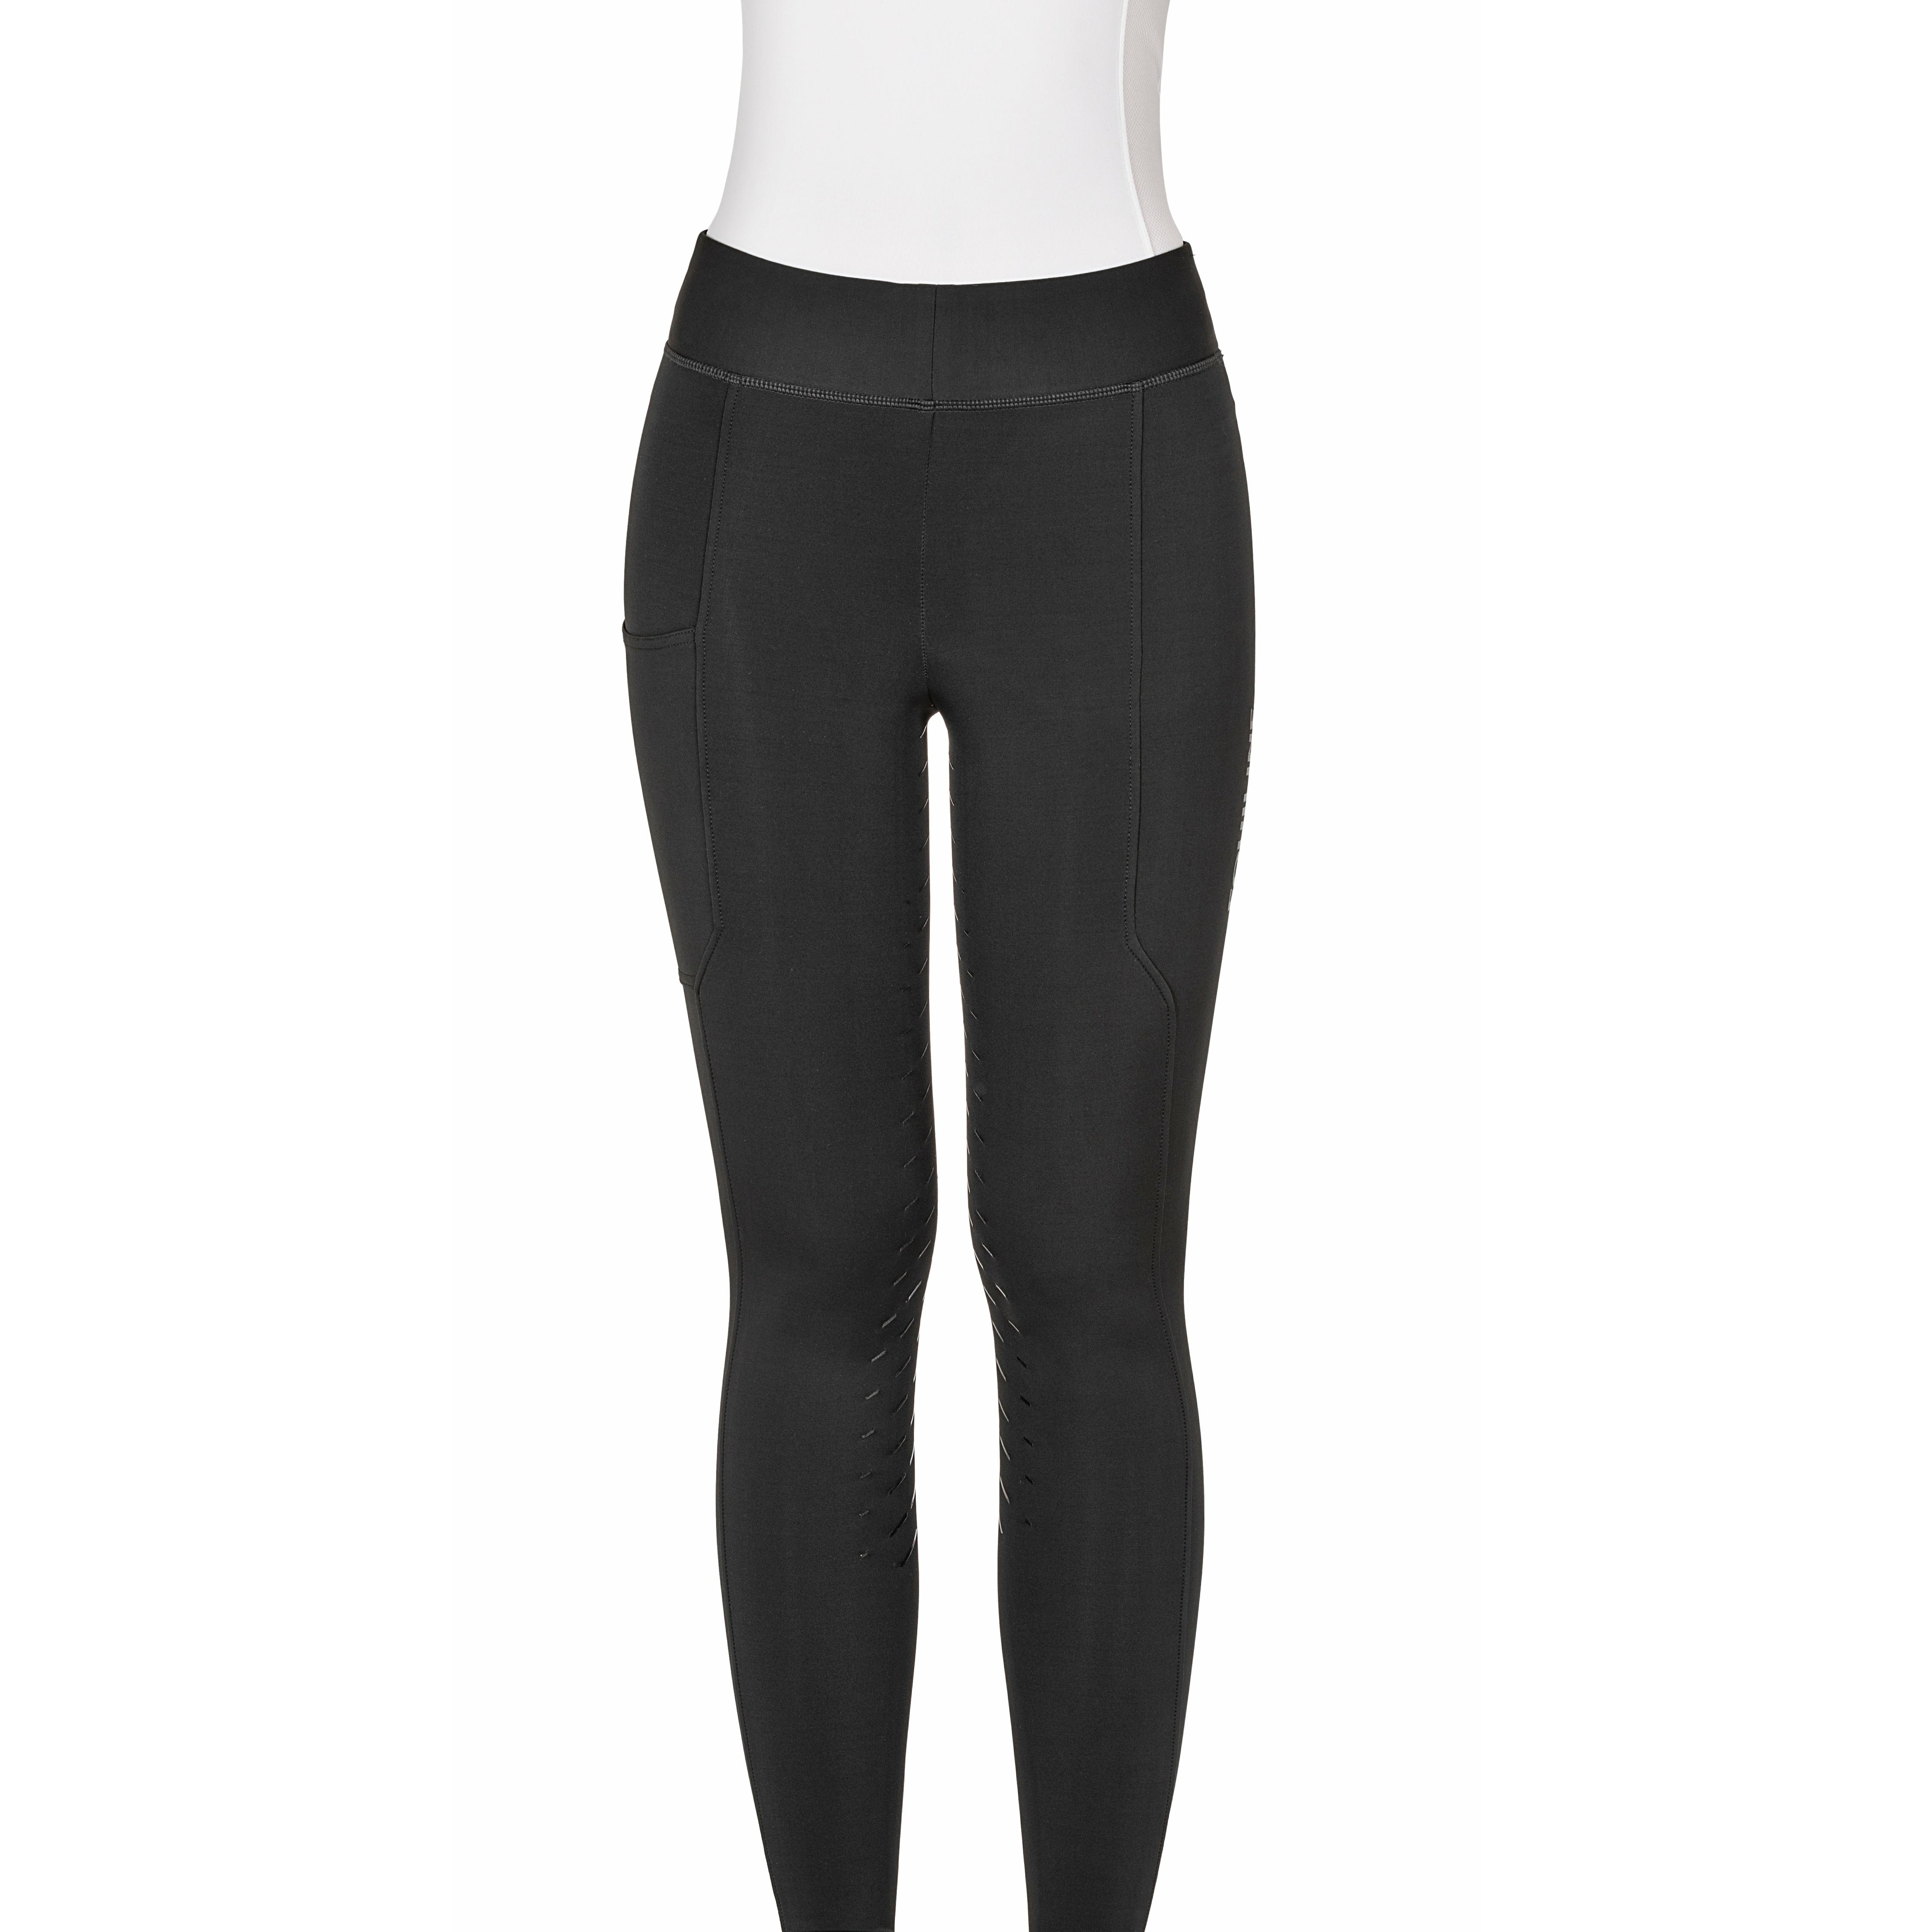 Up To 76% Off on Women Fitness Yoga Pants Spor... | Groupon Goods